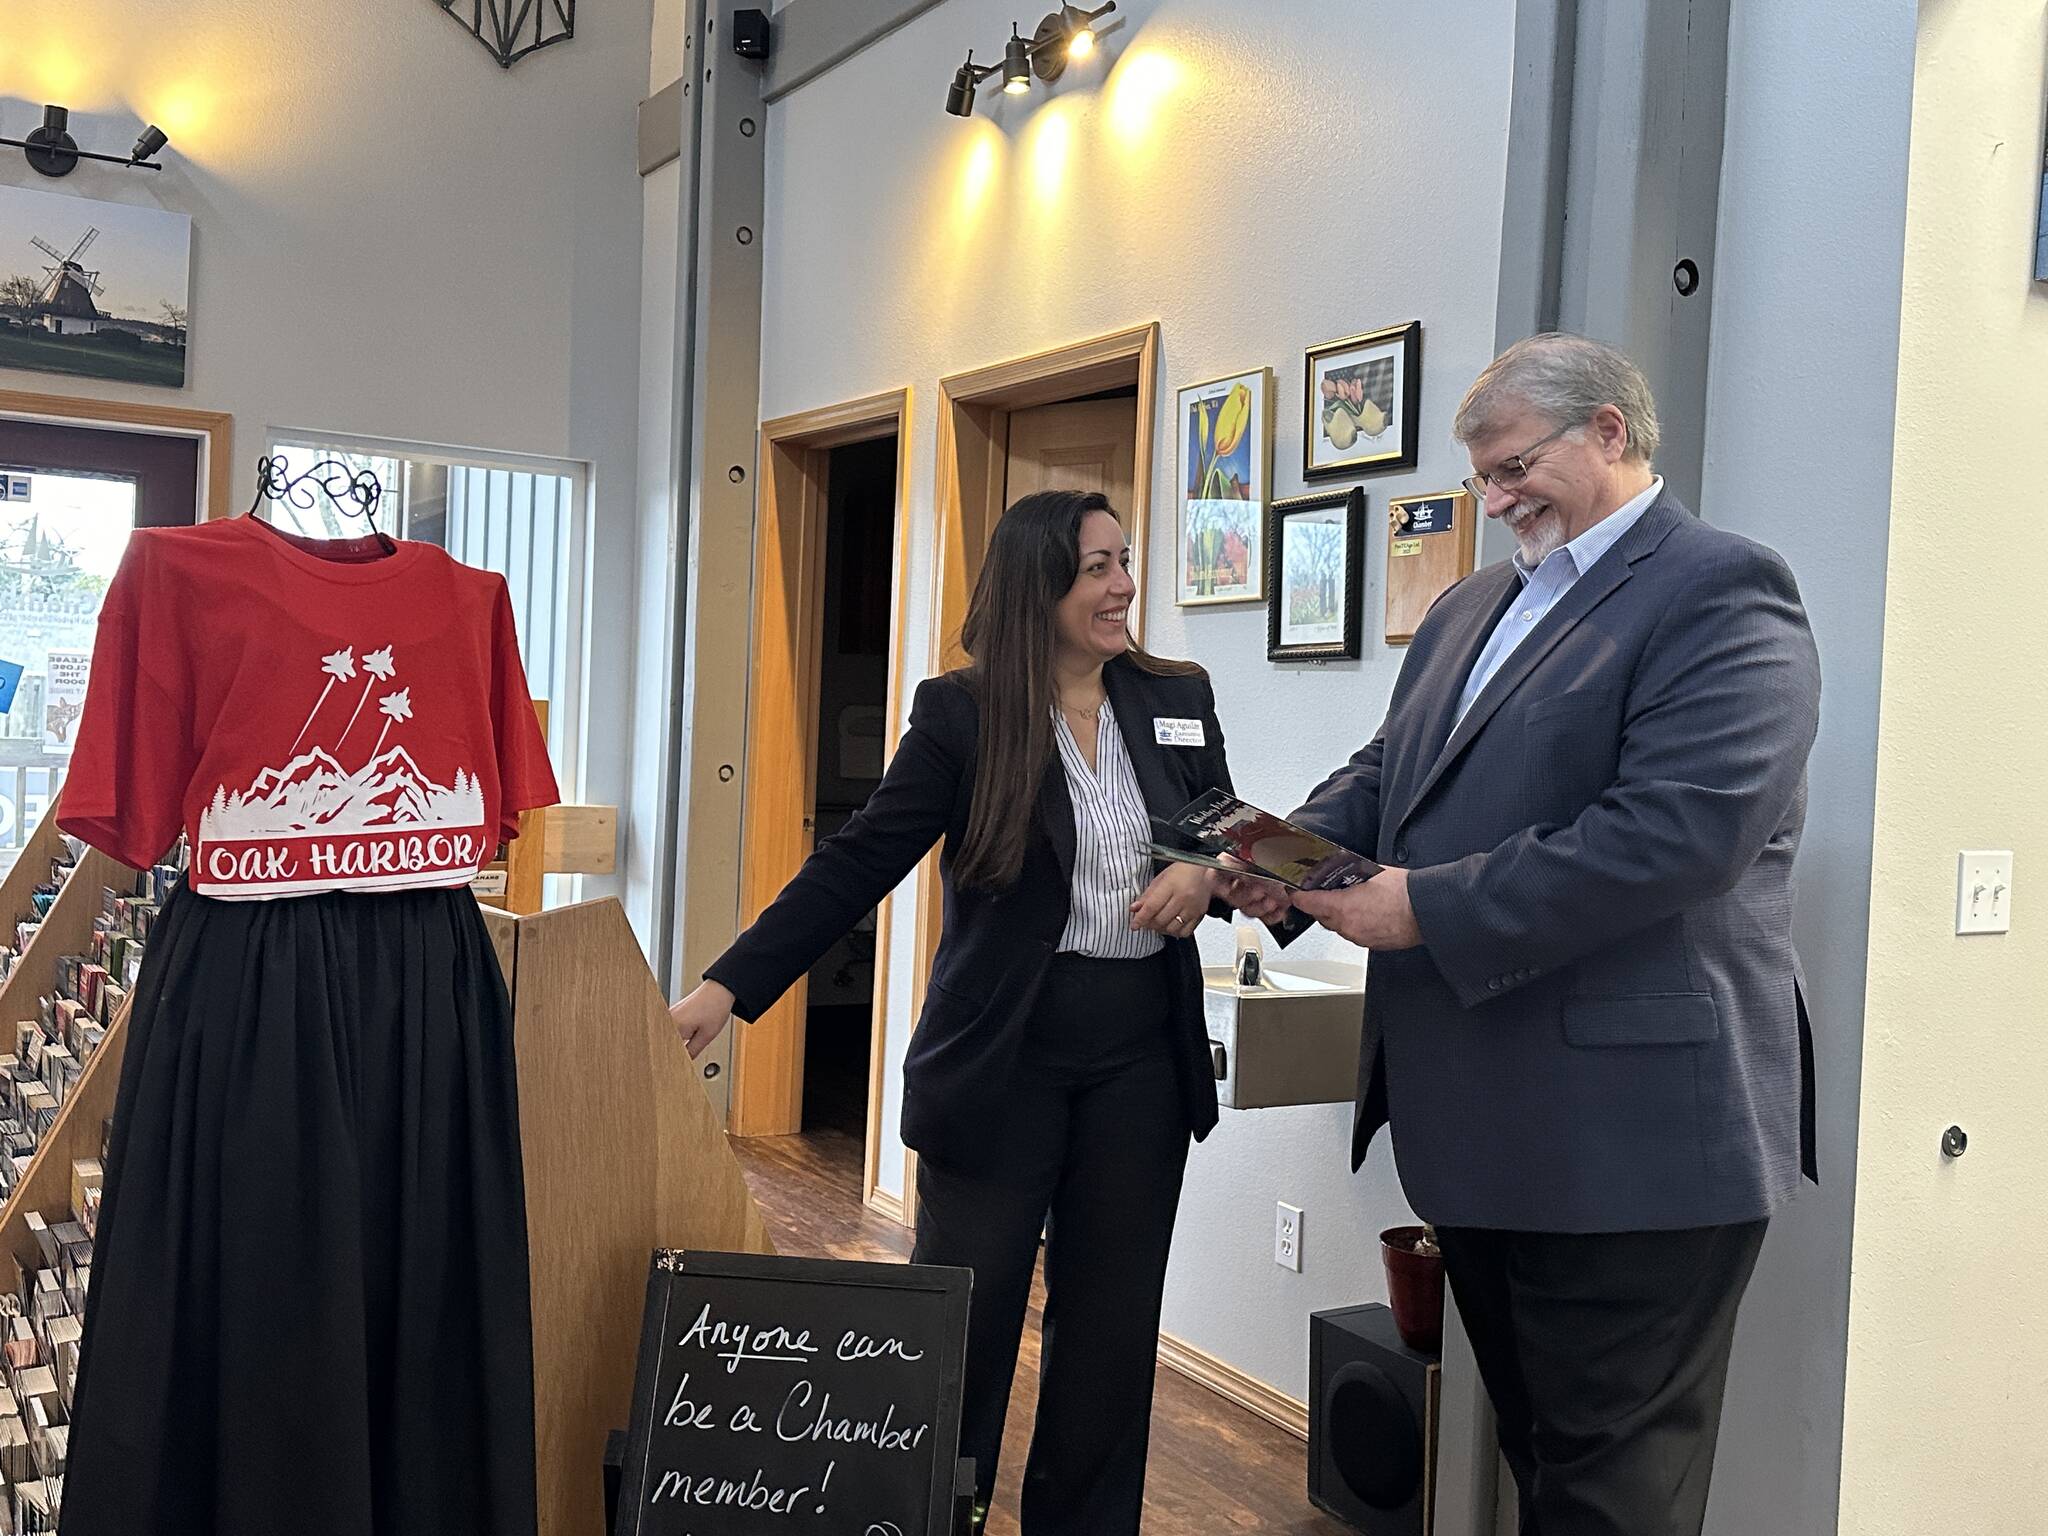 Oak Harbor Chamber of Commerce Executive Director Magi Aguilar (left) and Economic Development Coordinator Steve McCaslin (right) meeting businesses in downtown Oak Harbor. (Photo courtesy of the City of Oak Harbor)